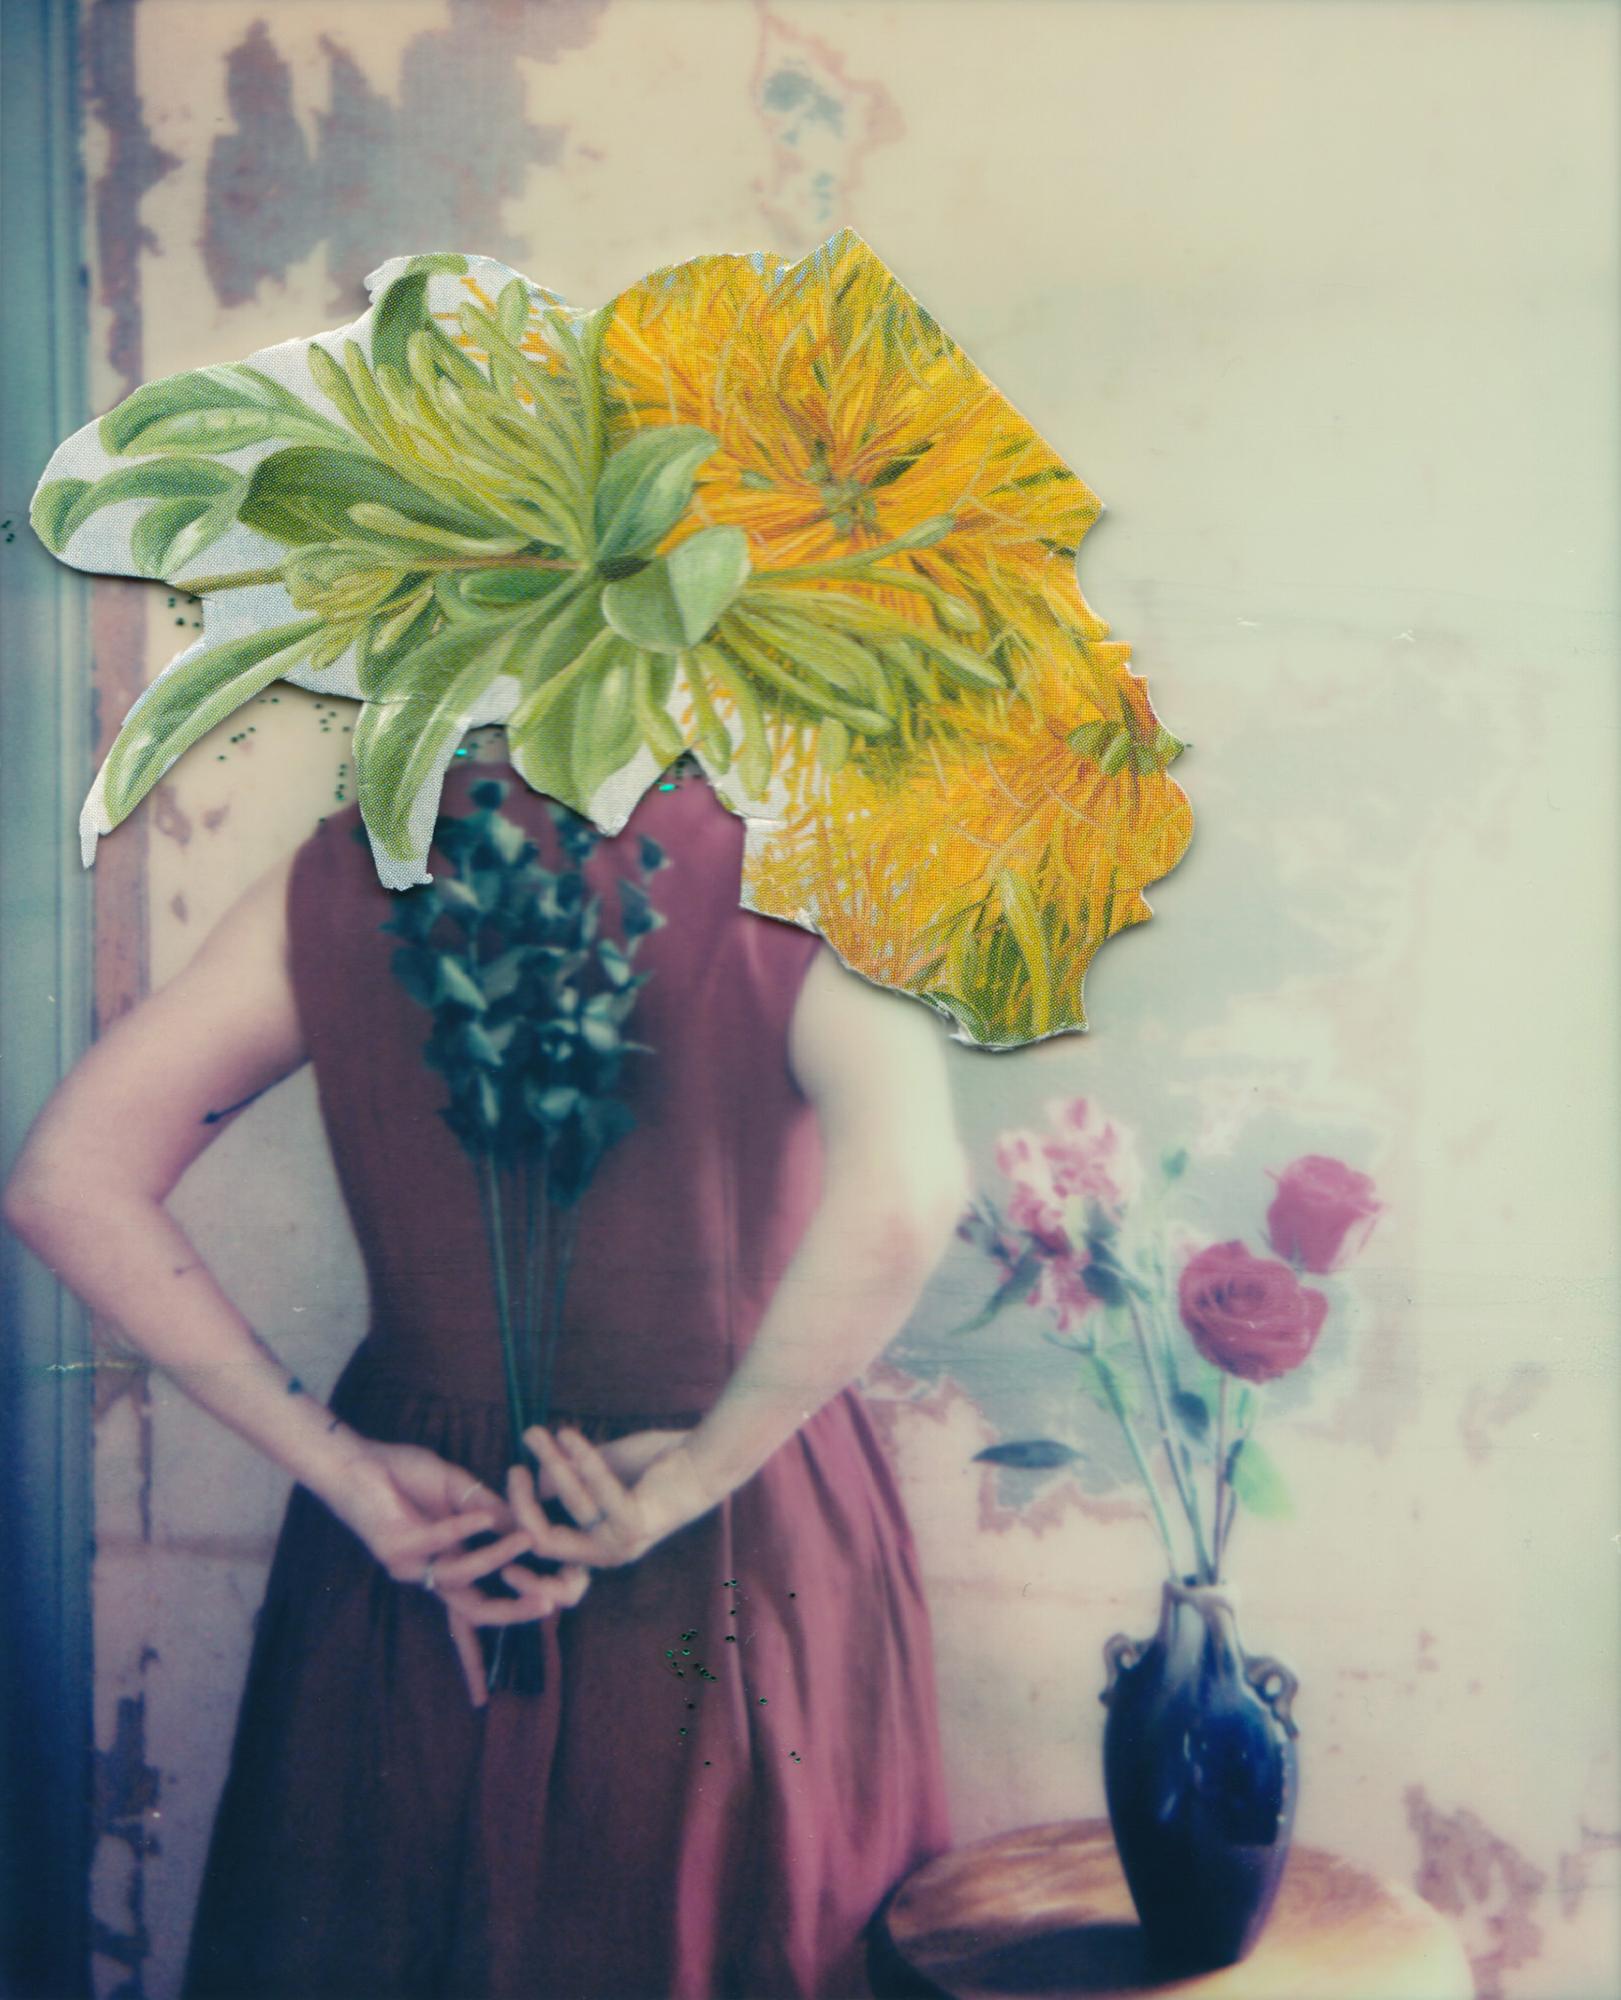 Lisa Toboz Figurative Photograph - In Bloom - Contemporary, Woman, Polaroid, Painting